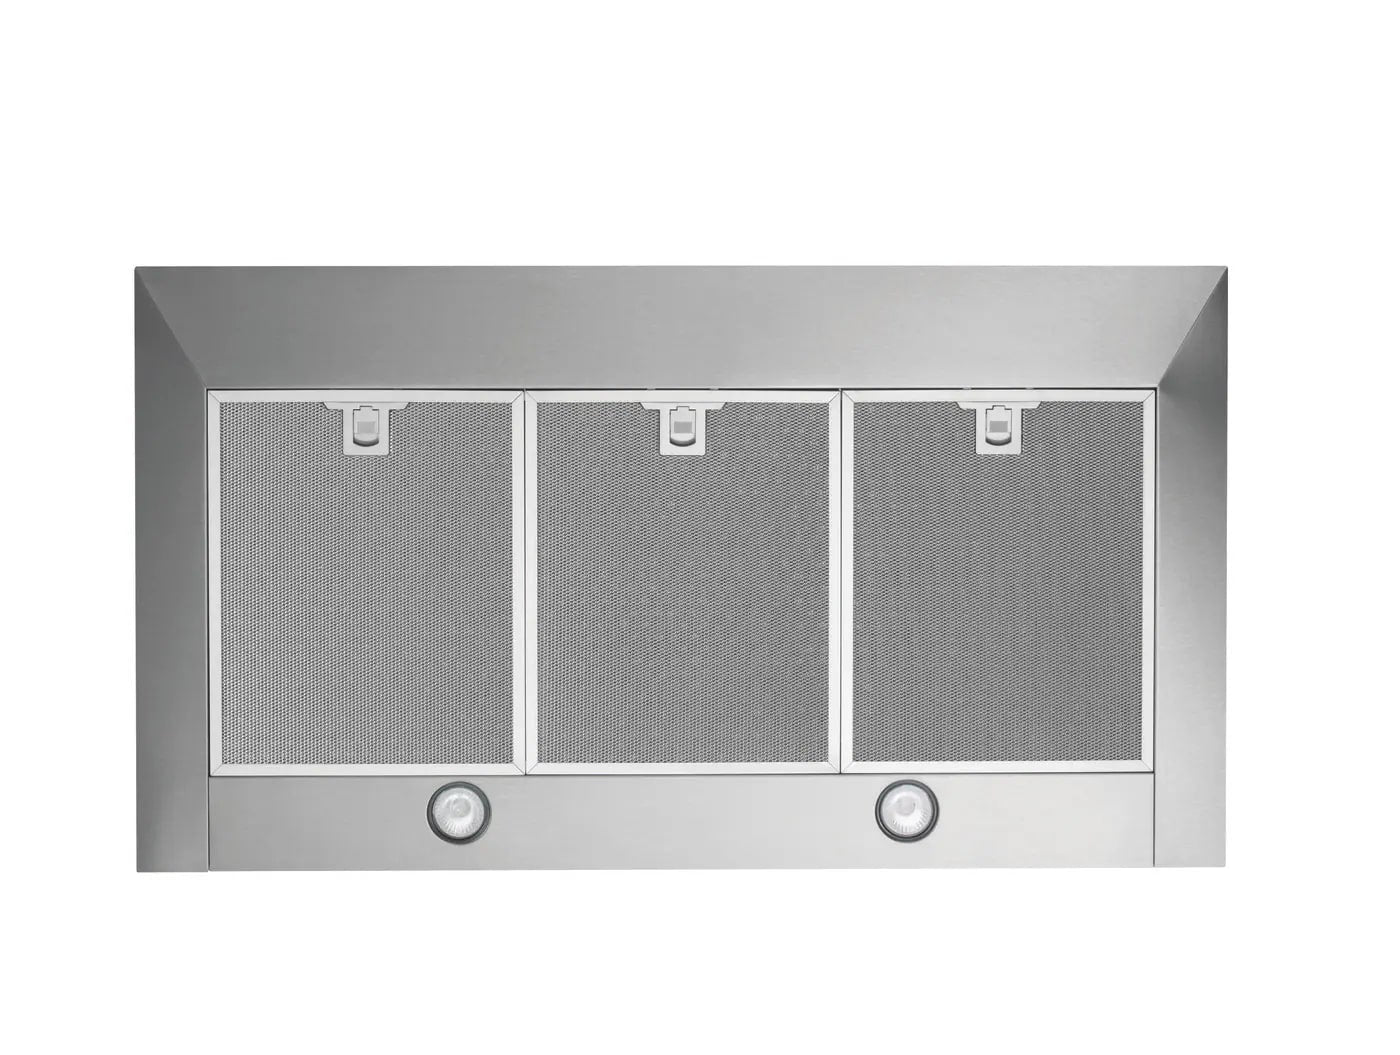 Frigidaire - 35.375 Inch 400 CFM Wall Mount and Chimney Range Vent in Stainless - FHWC3655LS